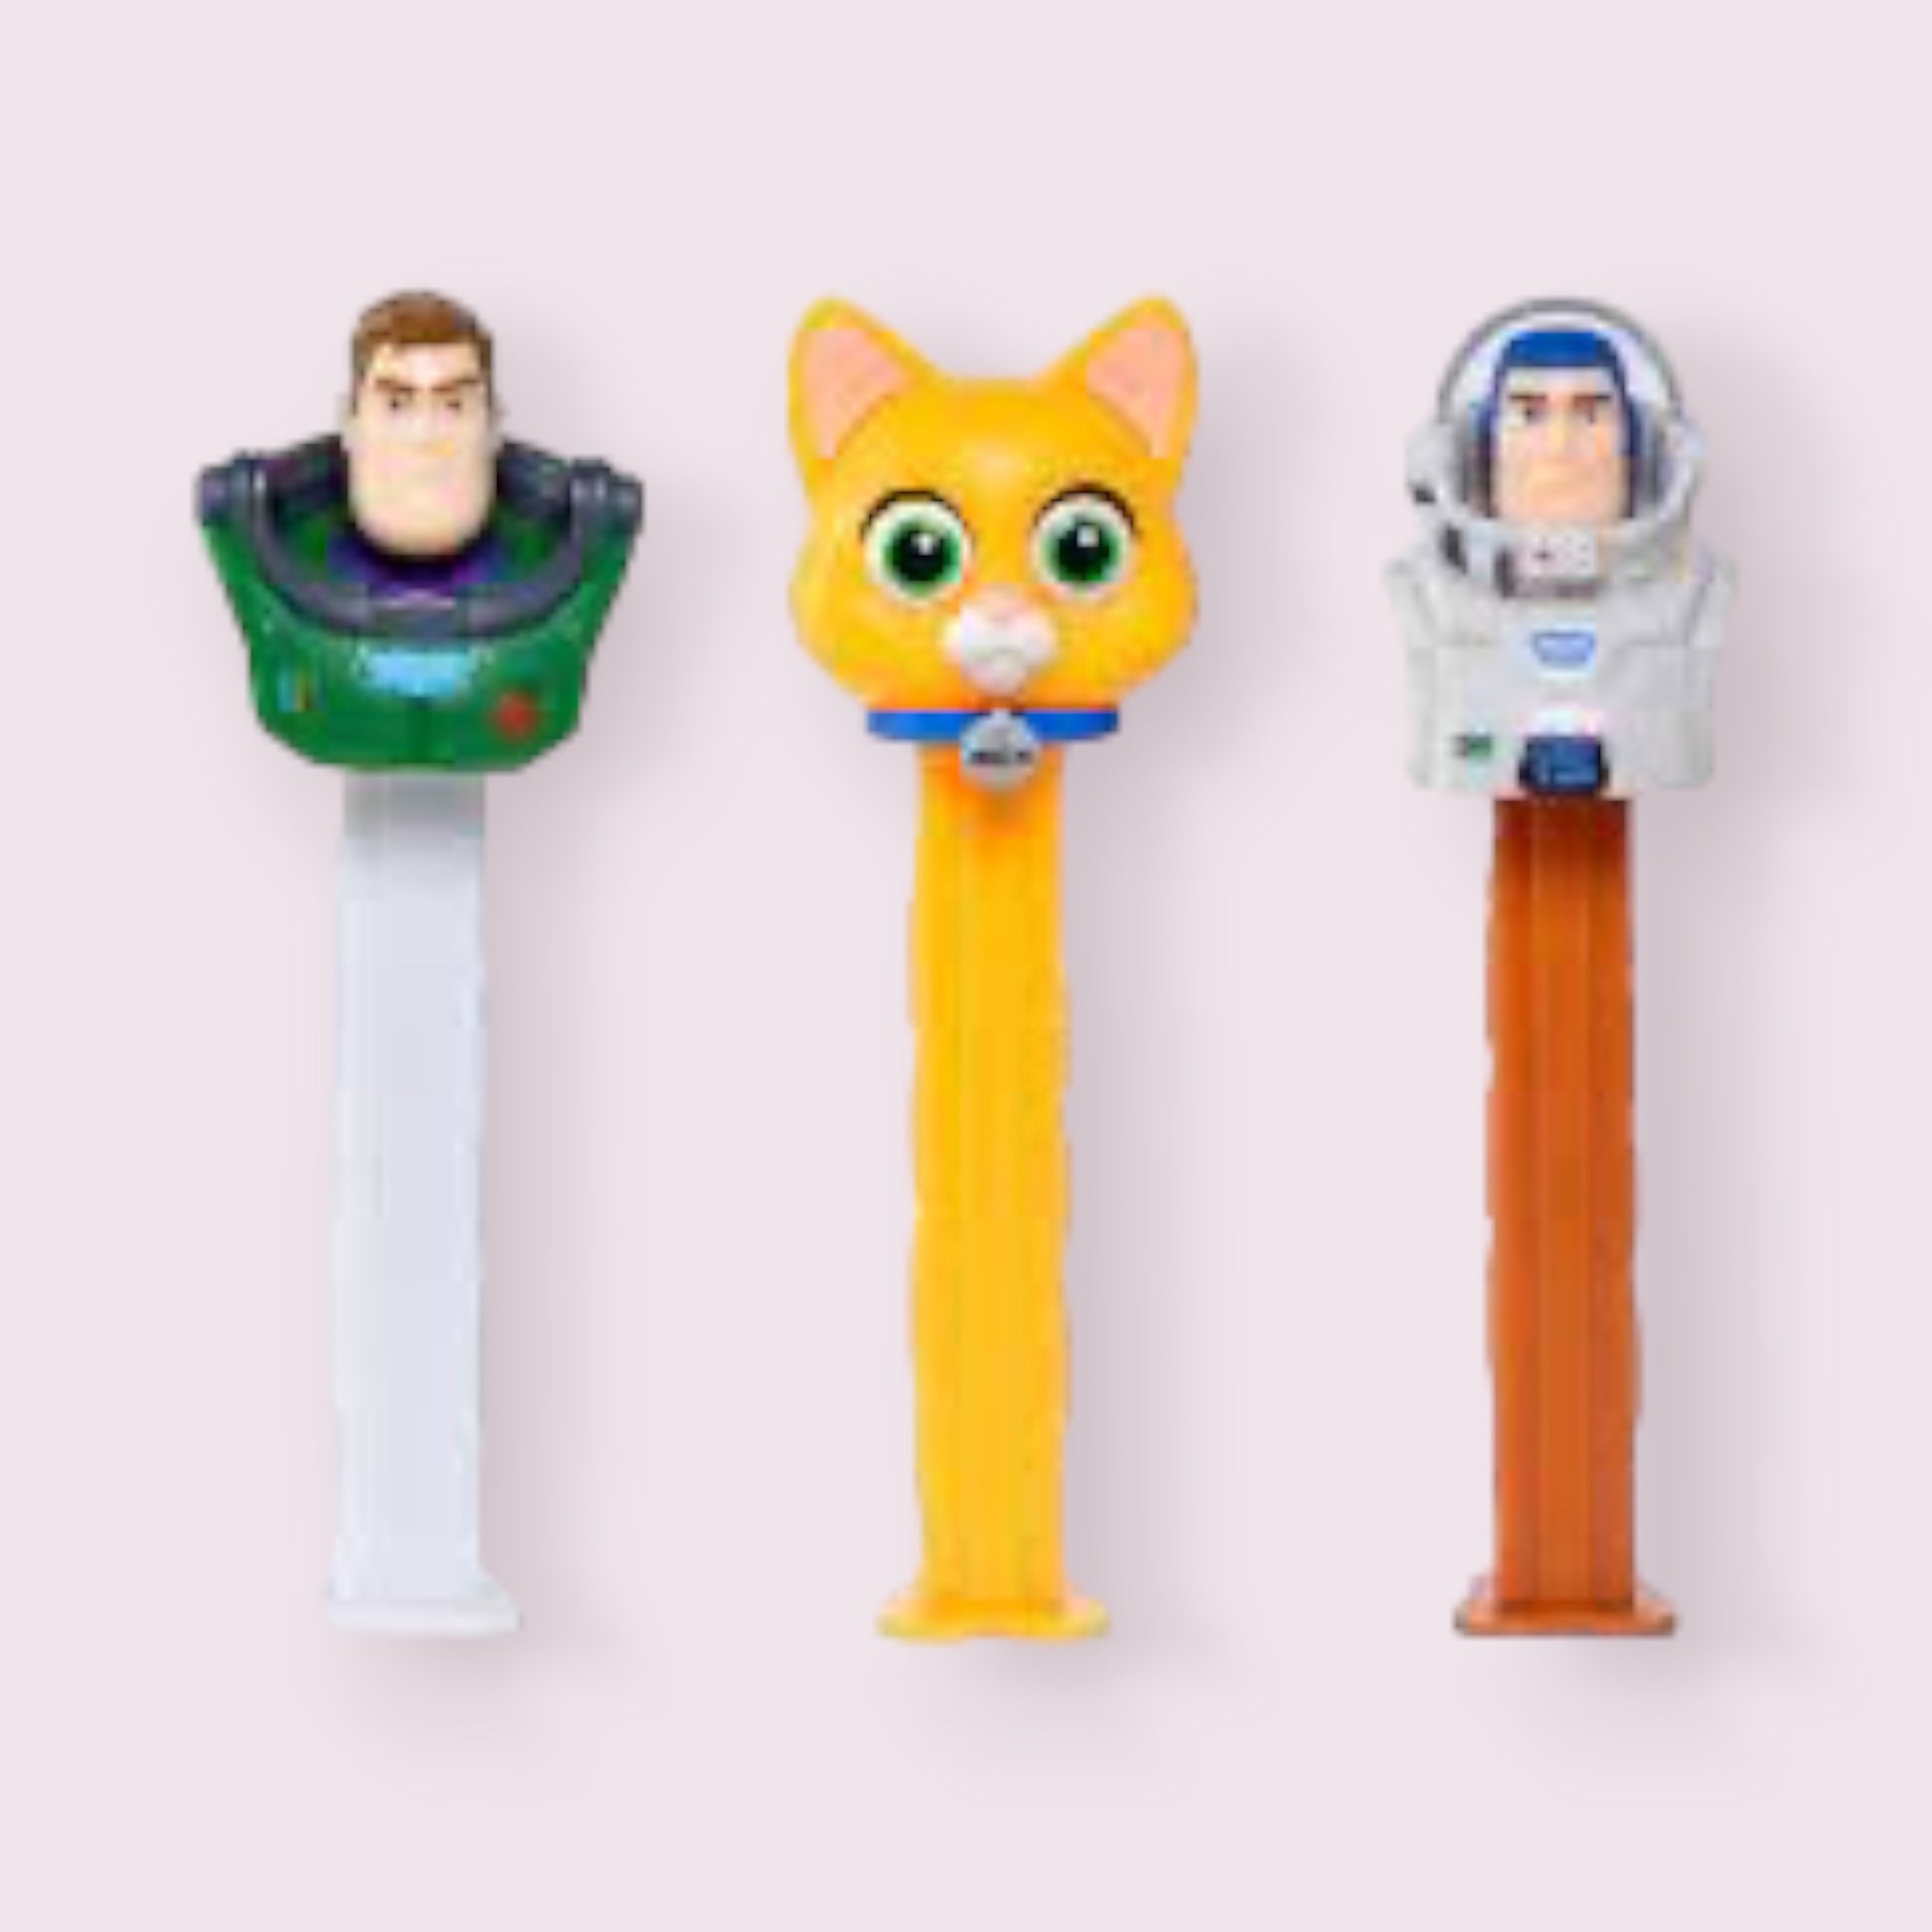 Pez Toy Story Series  Pixie Candy Shoppe   